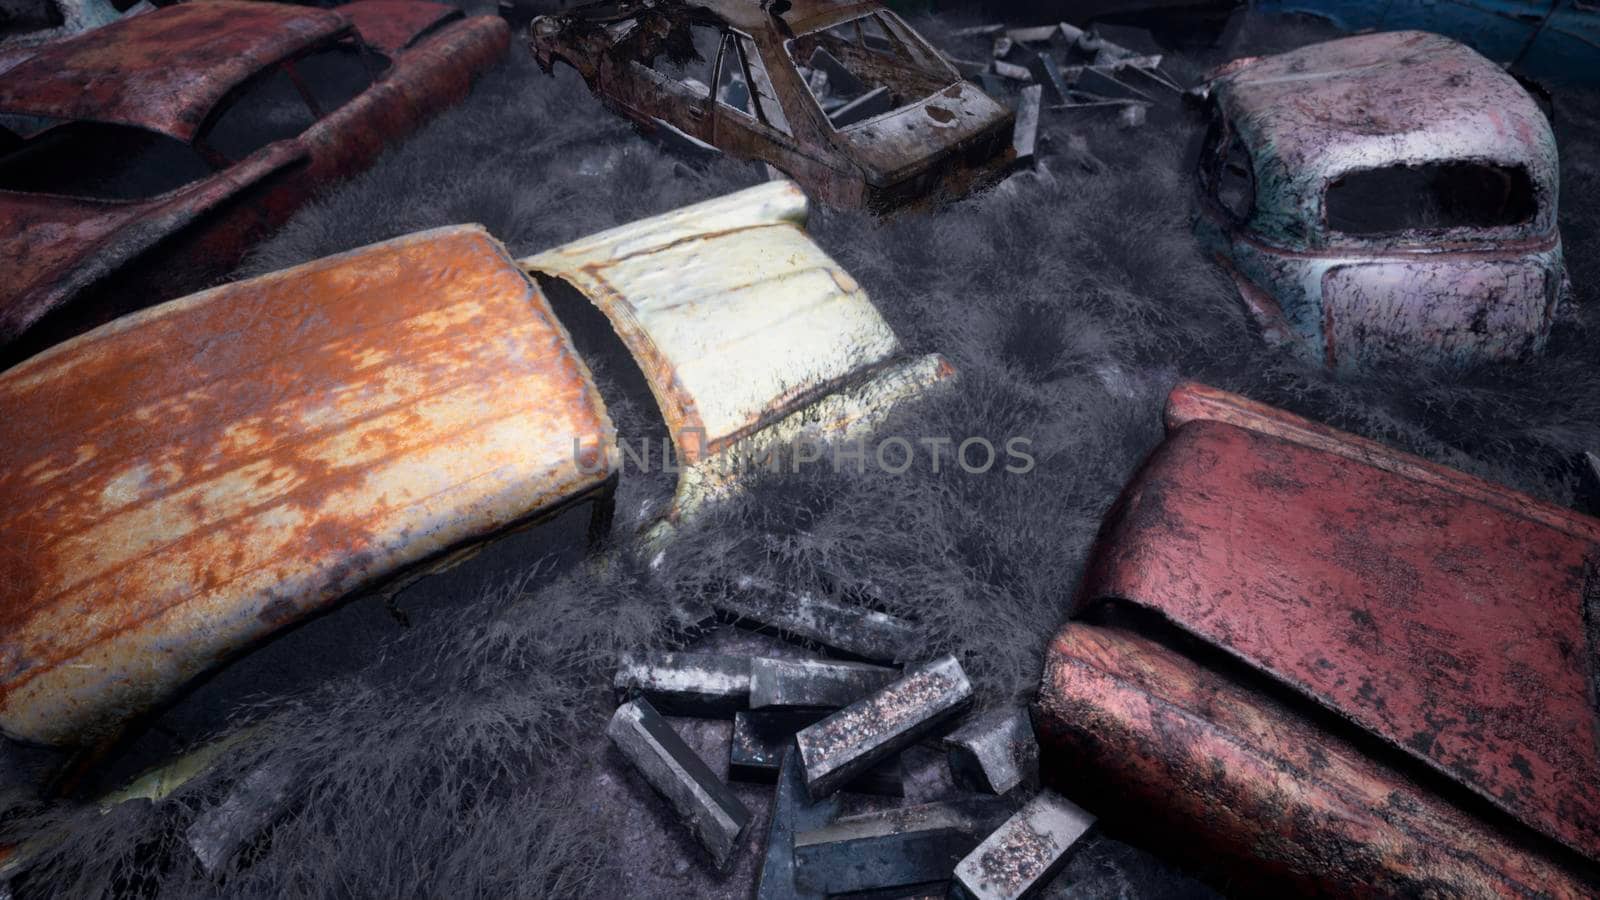 Car dump of old abandoned cars. Rusty damaged cars. A lot of destroyed, ruined, abandoned cars. 3D Rendering by designprojects